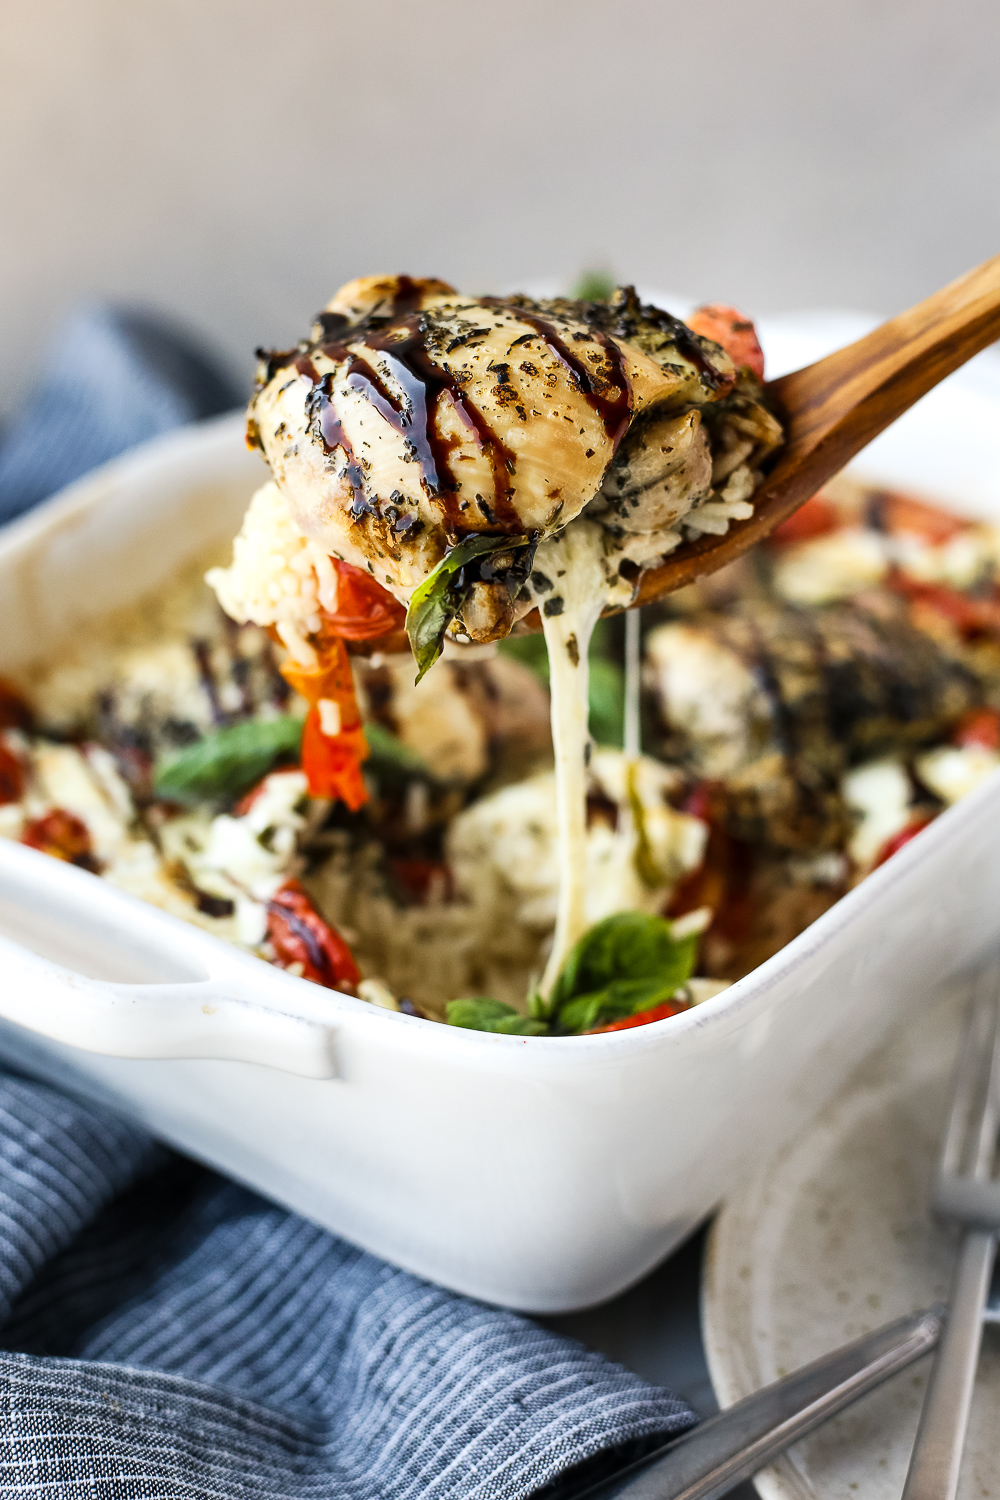 A wooden spoon dishes caprese chicken and rice bake from a while casserole dish, with melted mozzarella cheese stretching from the spoon to the dish